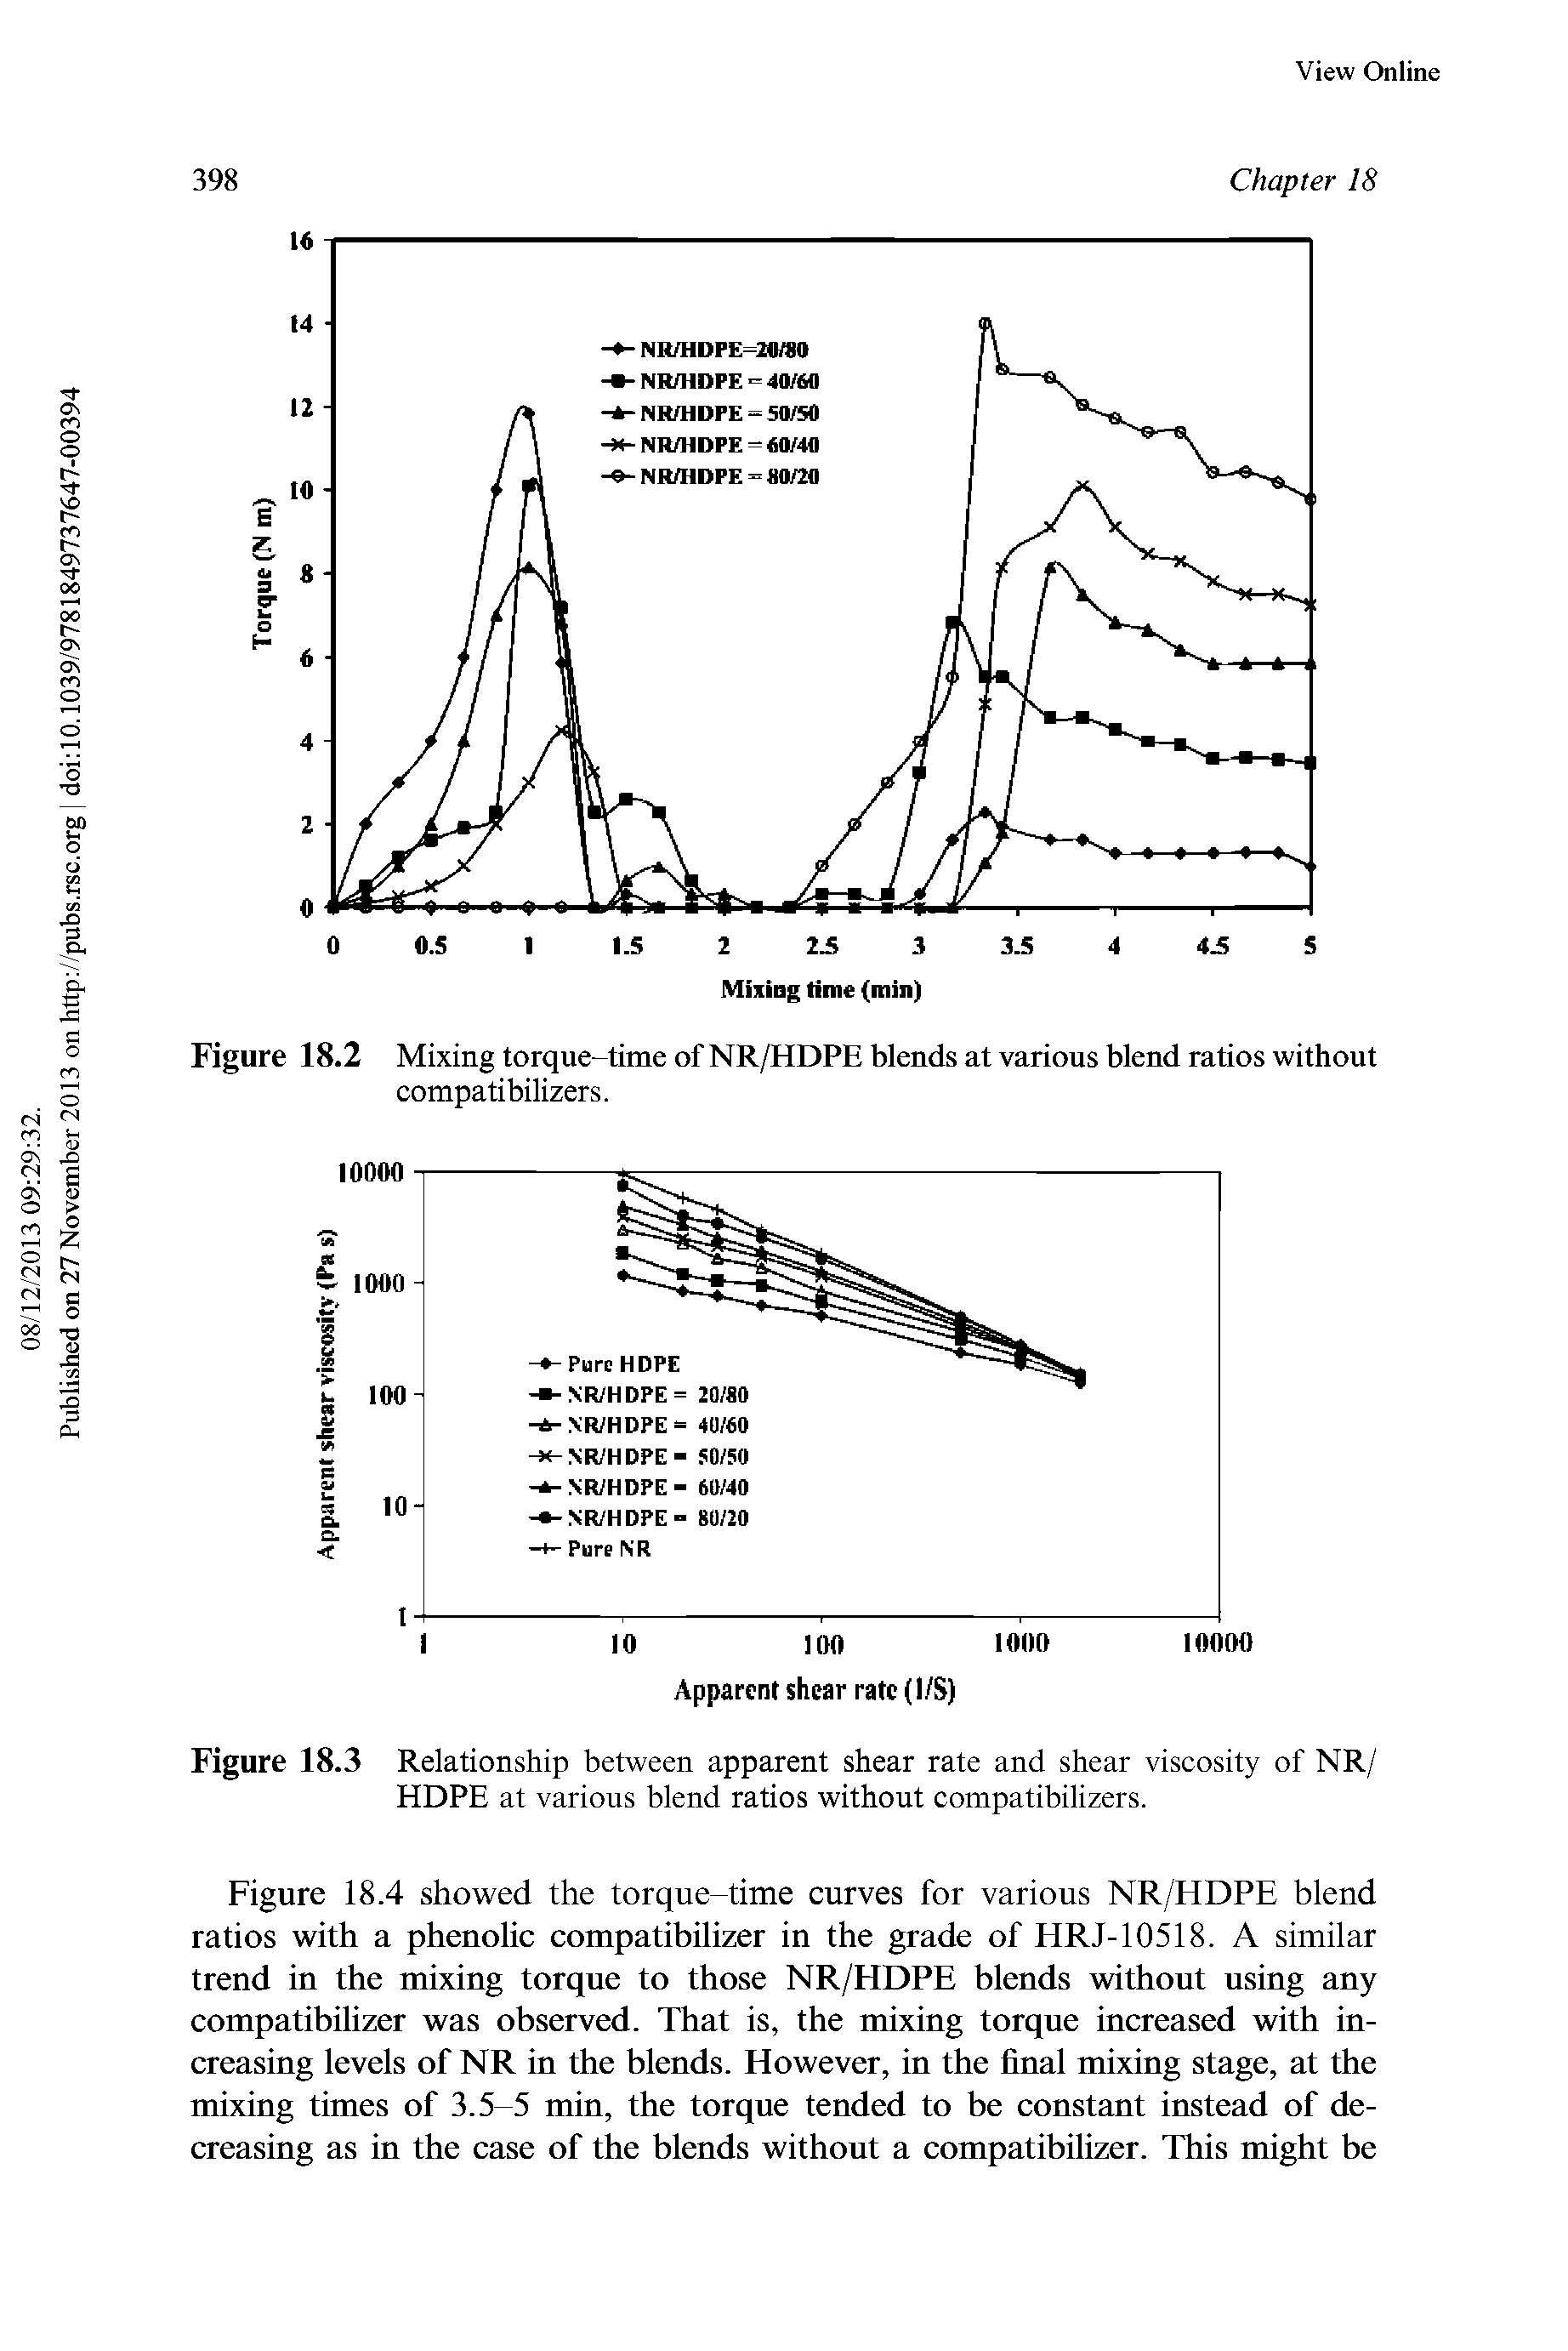 Figure 18.2 Mixing torque-time of NR/HDPE blends at various blend ratios without compatibilizers.